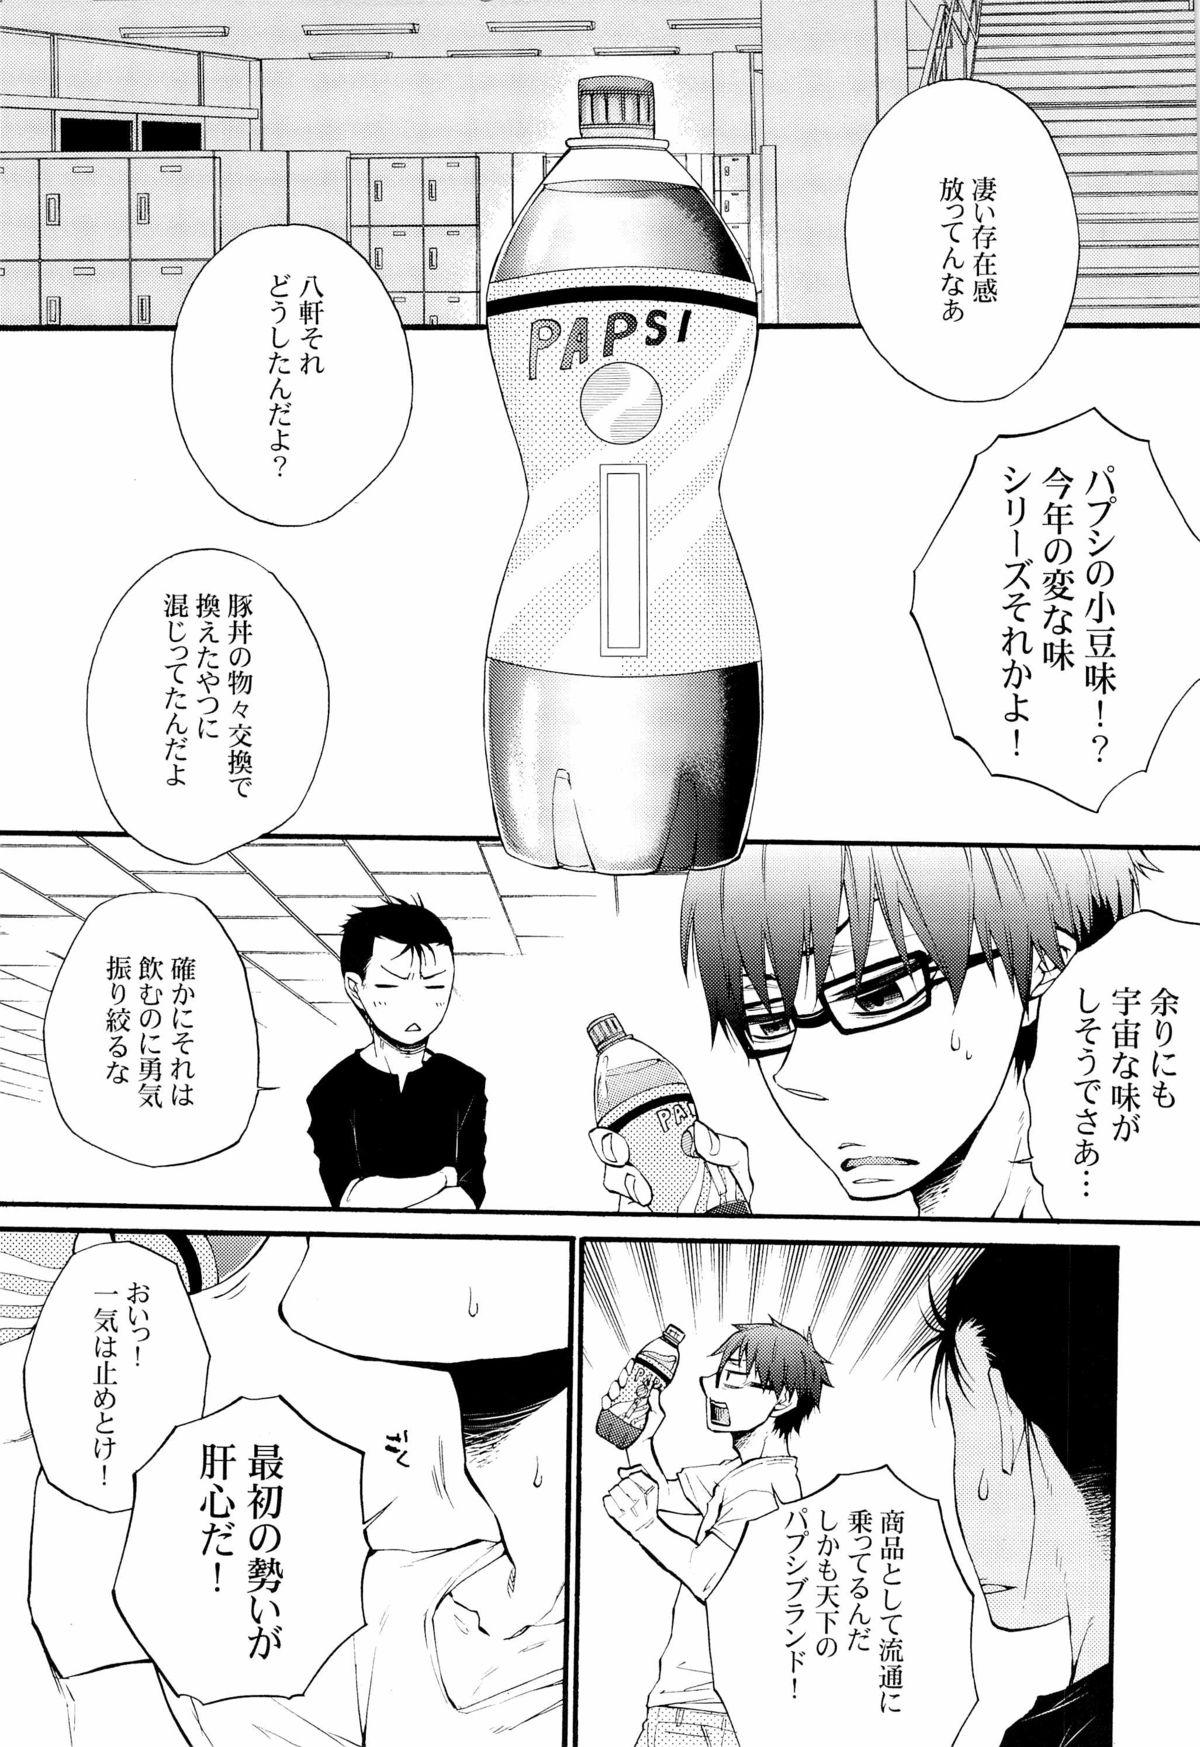 Friends AFTER TASTE - Silver spoon Passion - Page 5